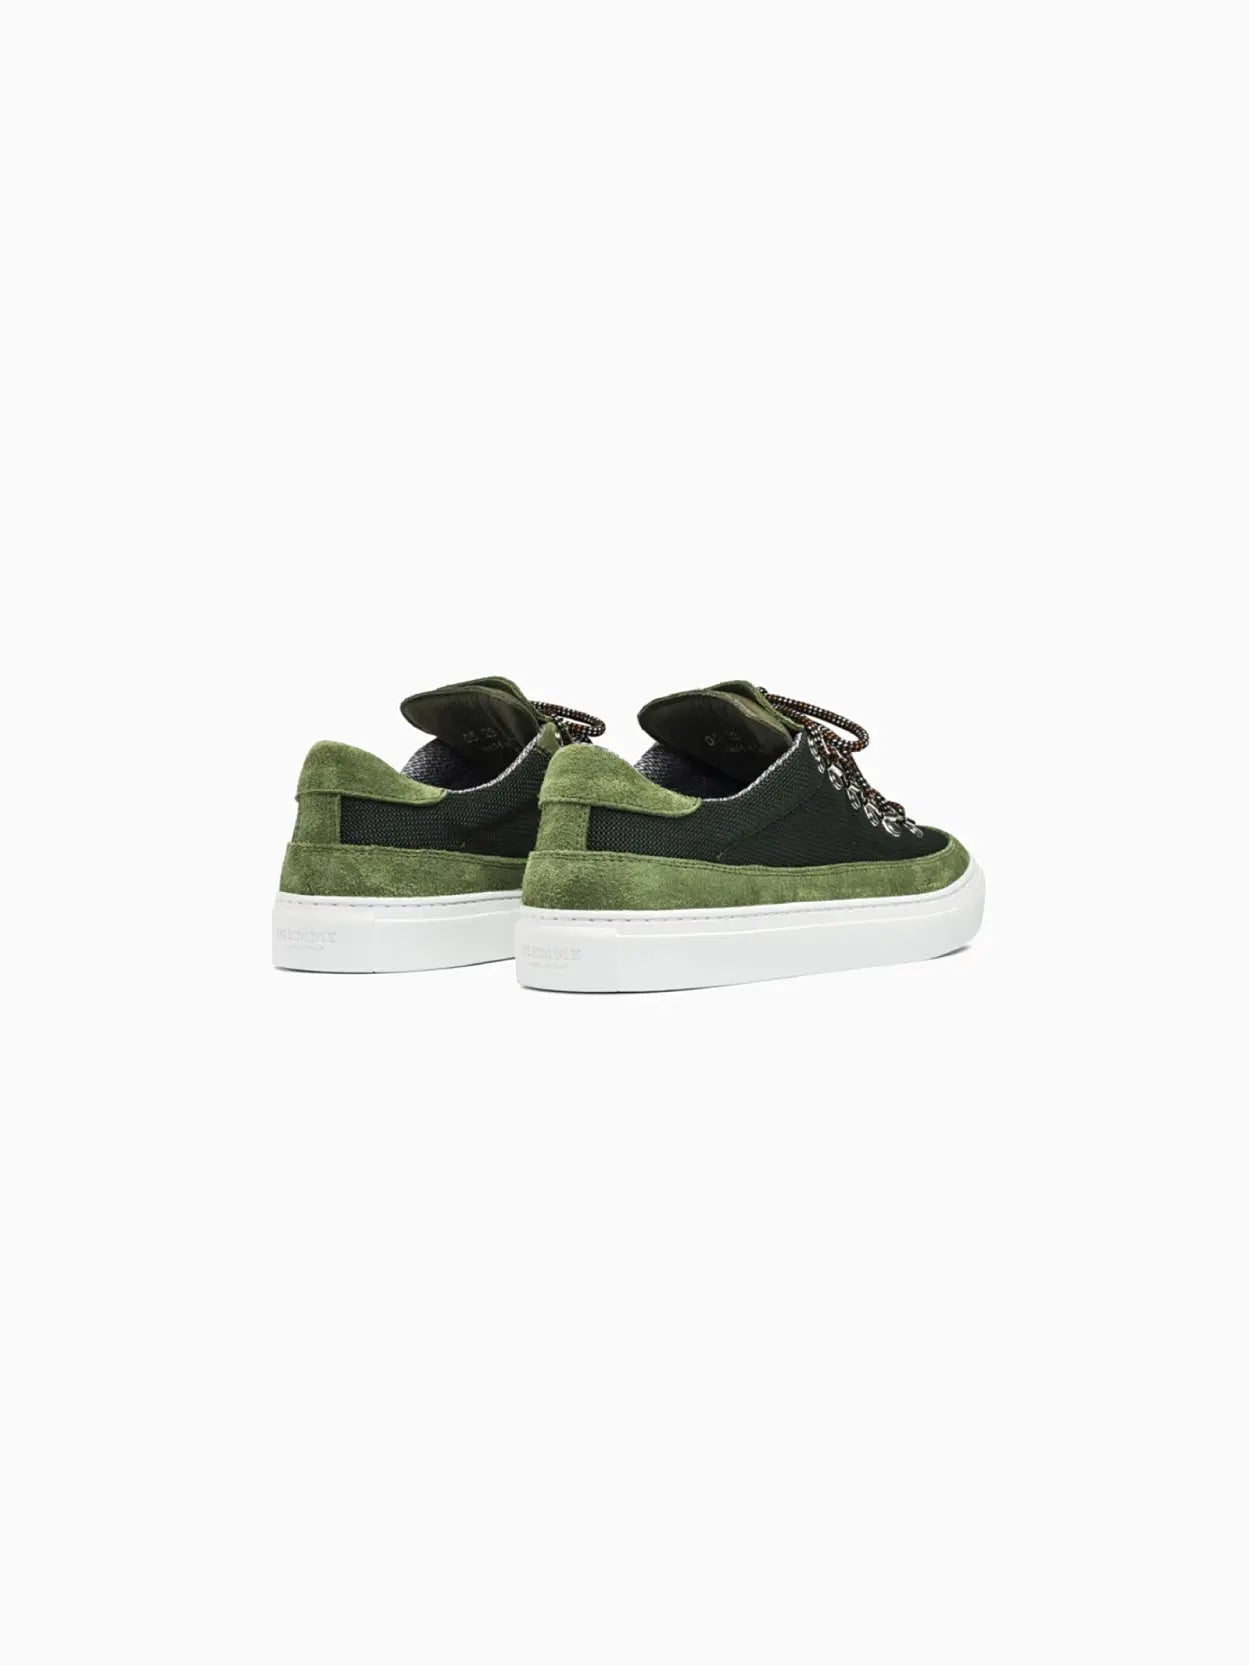 A single Marostica Low Evergreen sneaker by Diemme, from Bassal Store in Barcelona, is displayed on a white background. The shoe features bright green laces, silver eyelets, and a white sole. The upper part is made with a mix of dark green and olive green fabric, giving it a textured appearance.